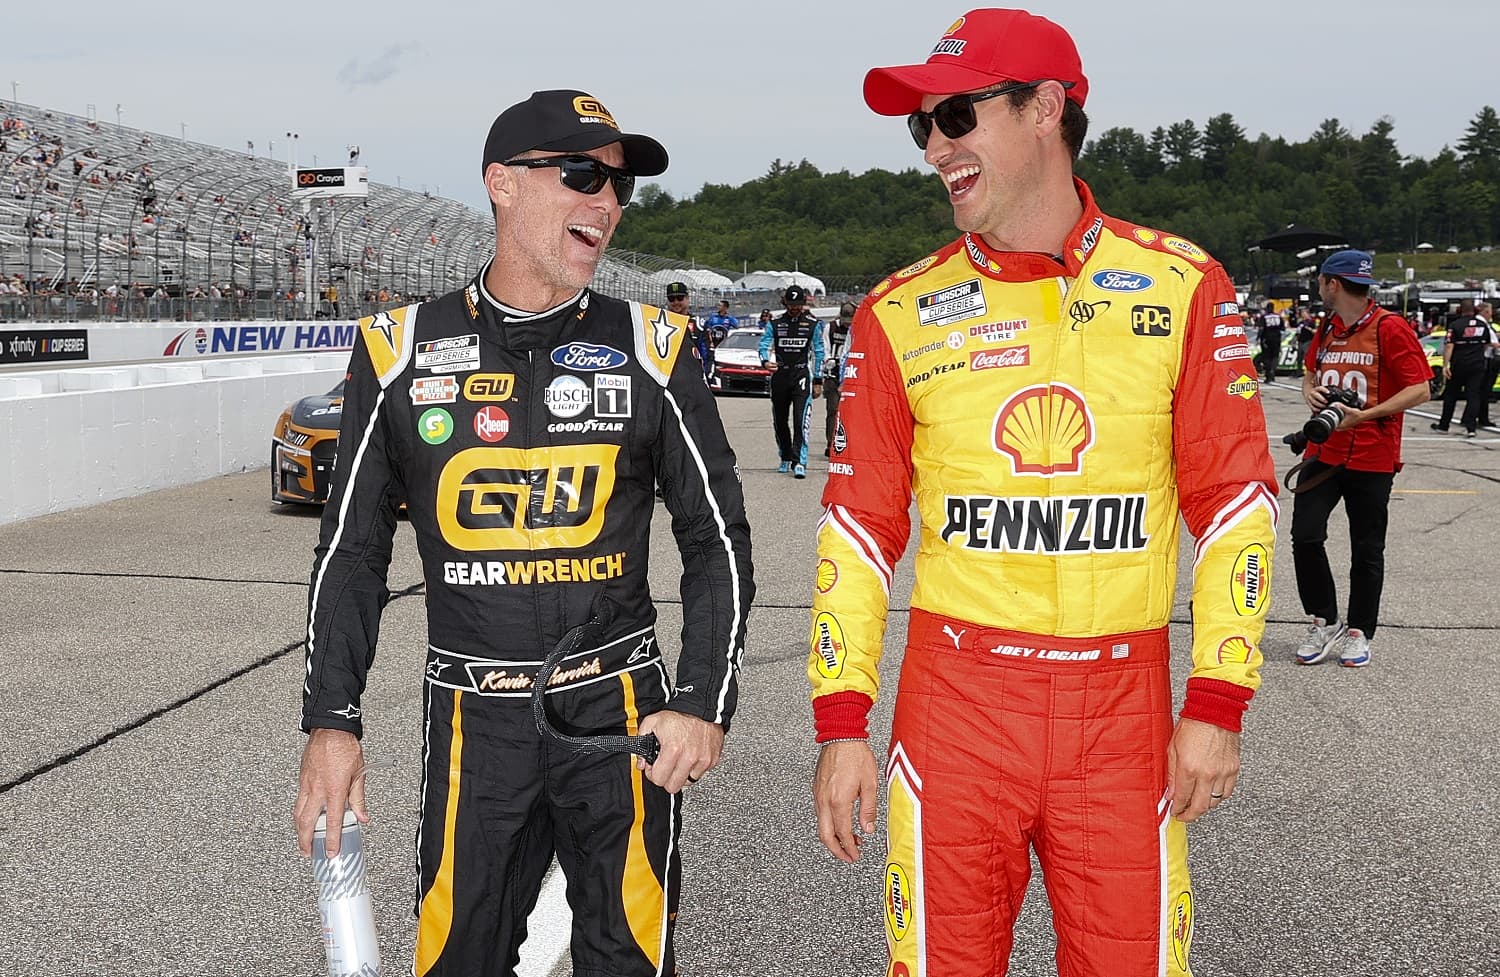 Kevin Harvick and Joey Logano walk the grid during qualifying for the NASCAR Cup Series Ambetter 301 at New Hampshire Motor Speedway on July 16, 2022.